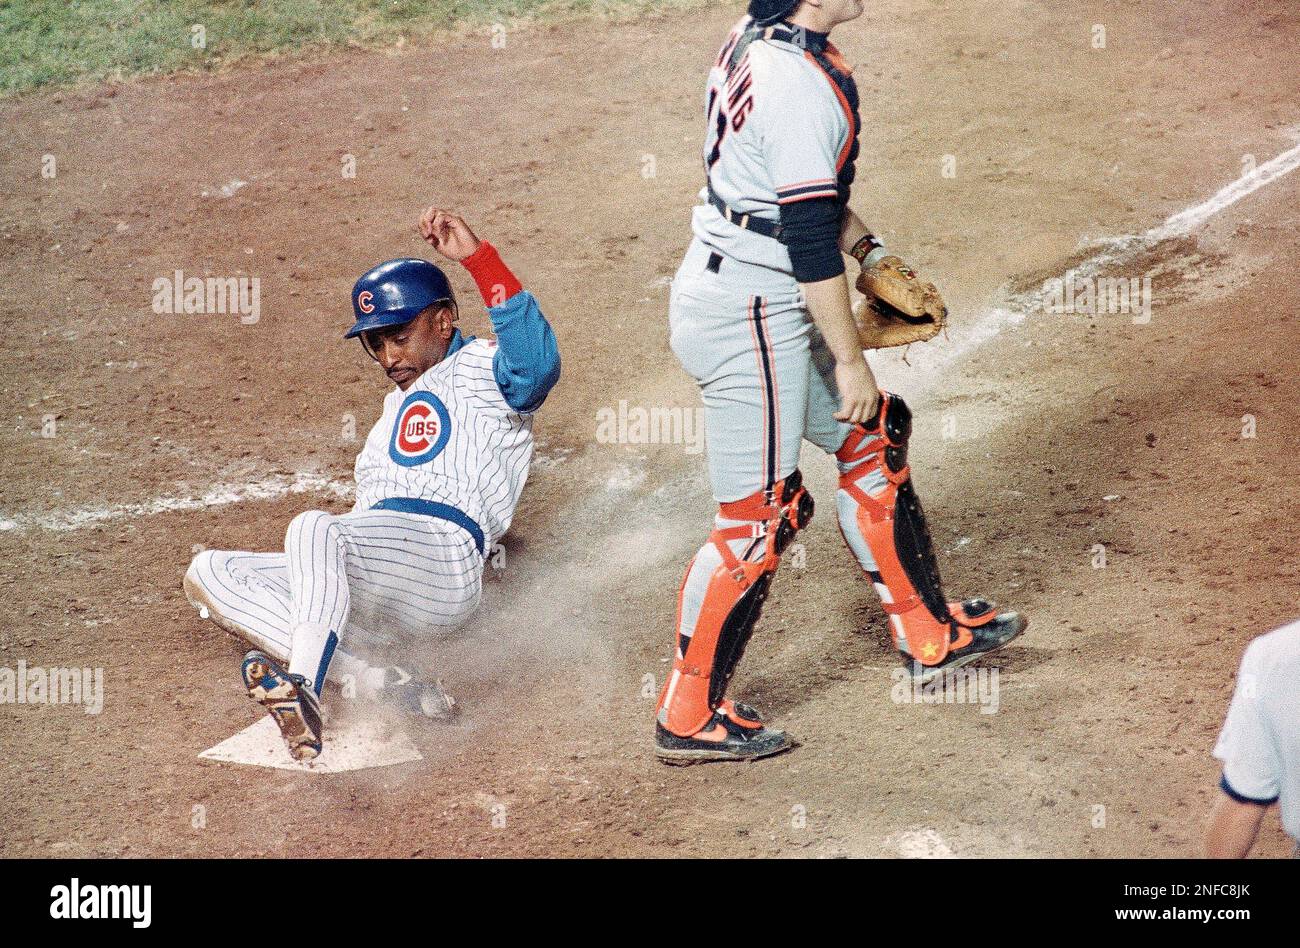 Chicago Cubs Dwight Smith, left, slides home behind San Francisco